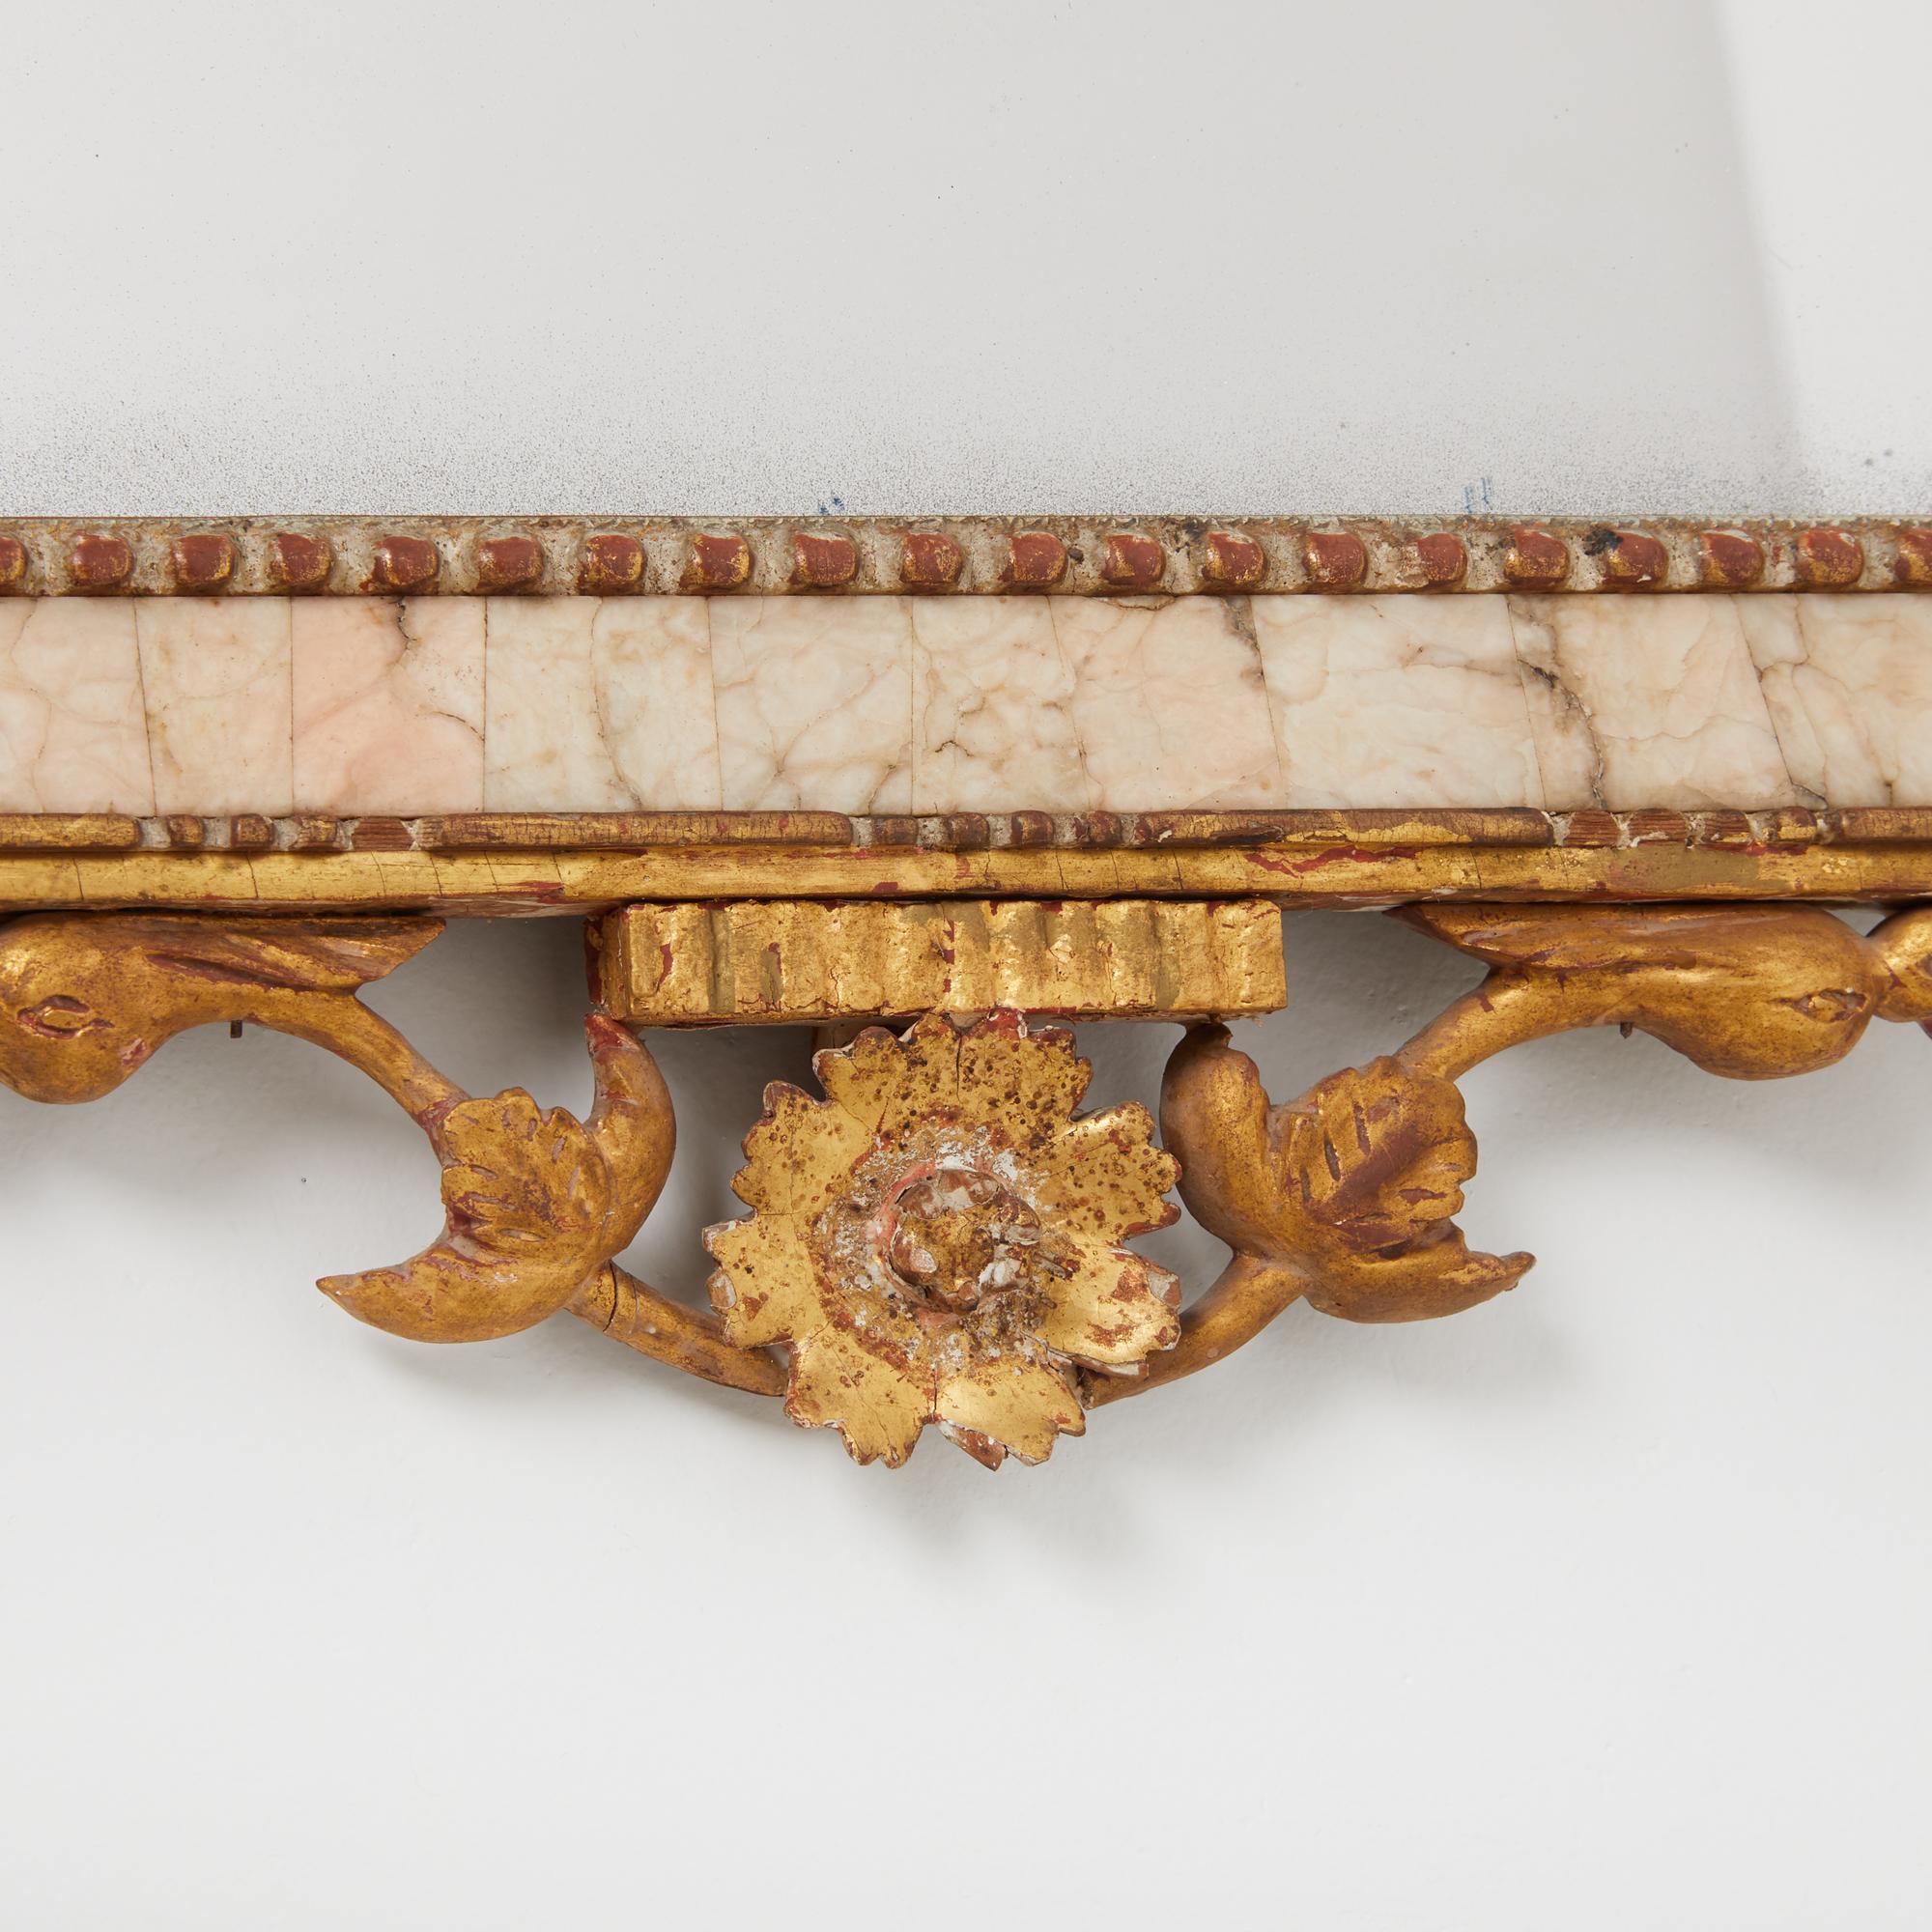 An early 19th century Spanish Louis XVI Style Bilbao mirror with pale pink marble veneer columns and gilt wood and gesso flowers, urn motifs, and granulated texture on frame. Circa 1820.

Measures: 27” height x 19” width x 2” depth

Mirror